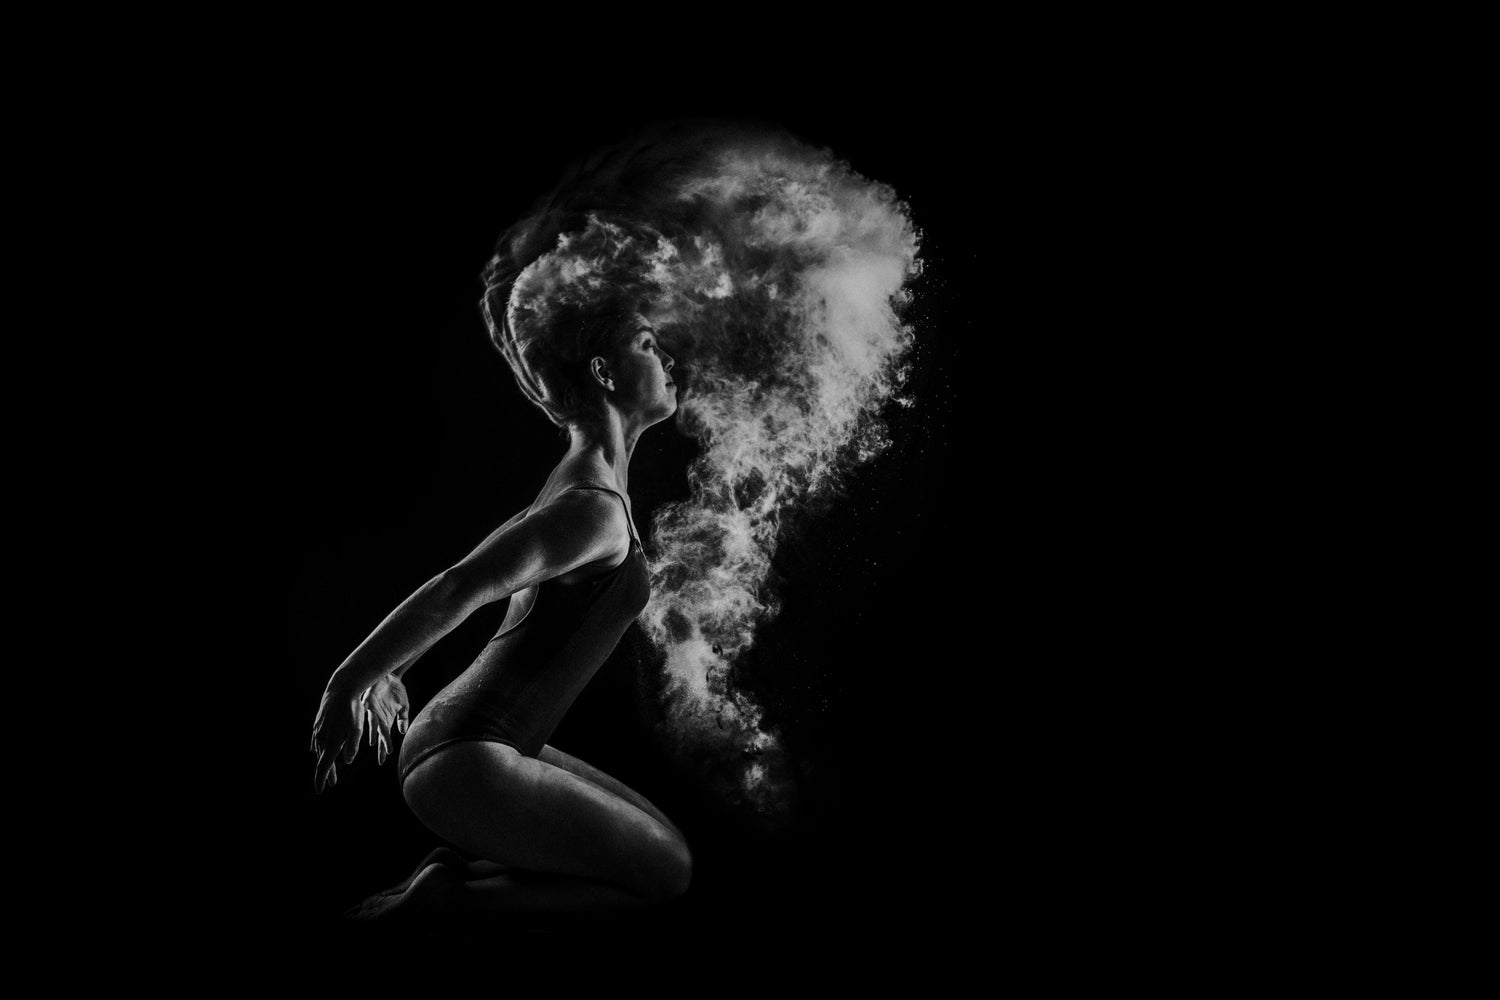 A flexible looking woman performing some form of dance with smoke/steam coming from her body.